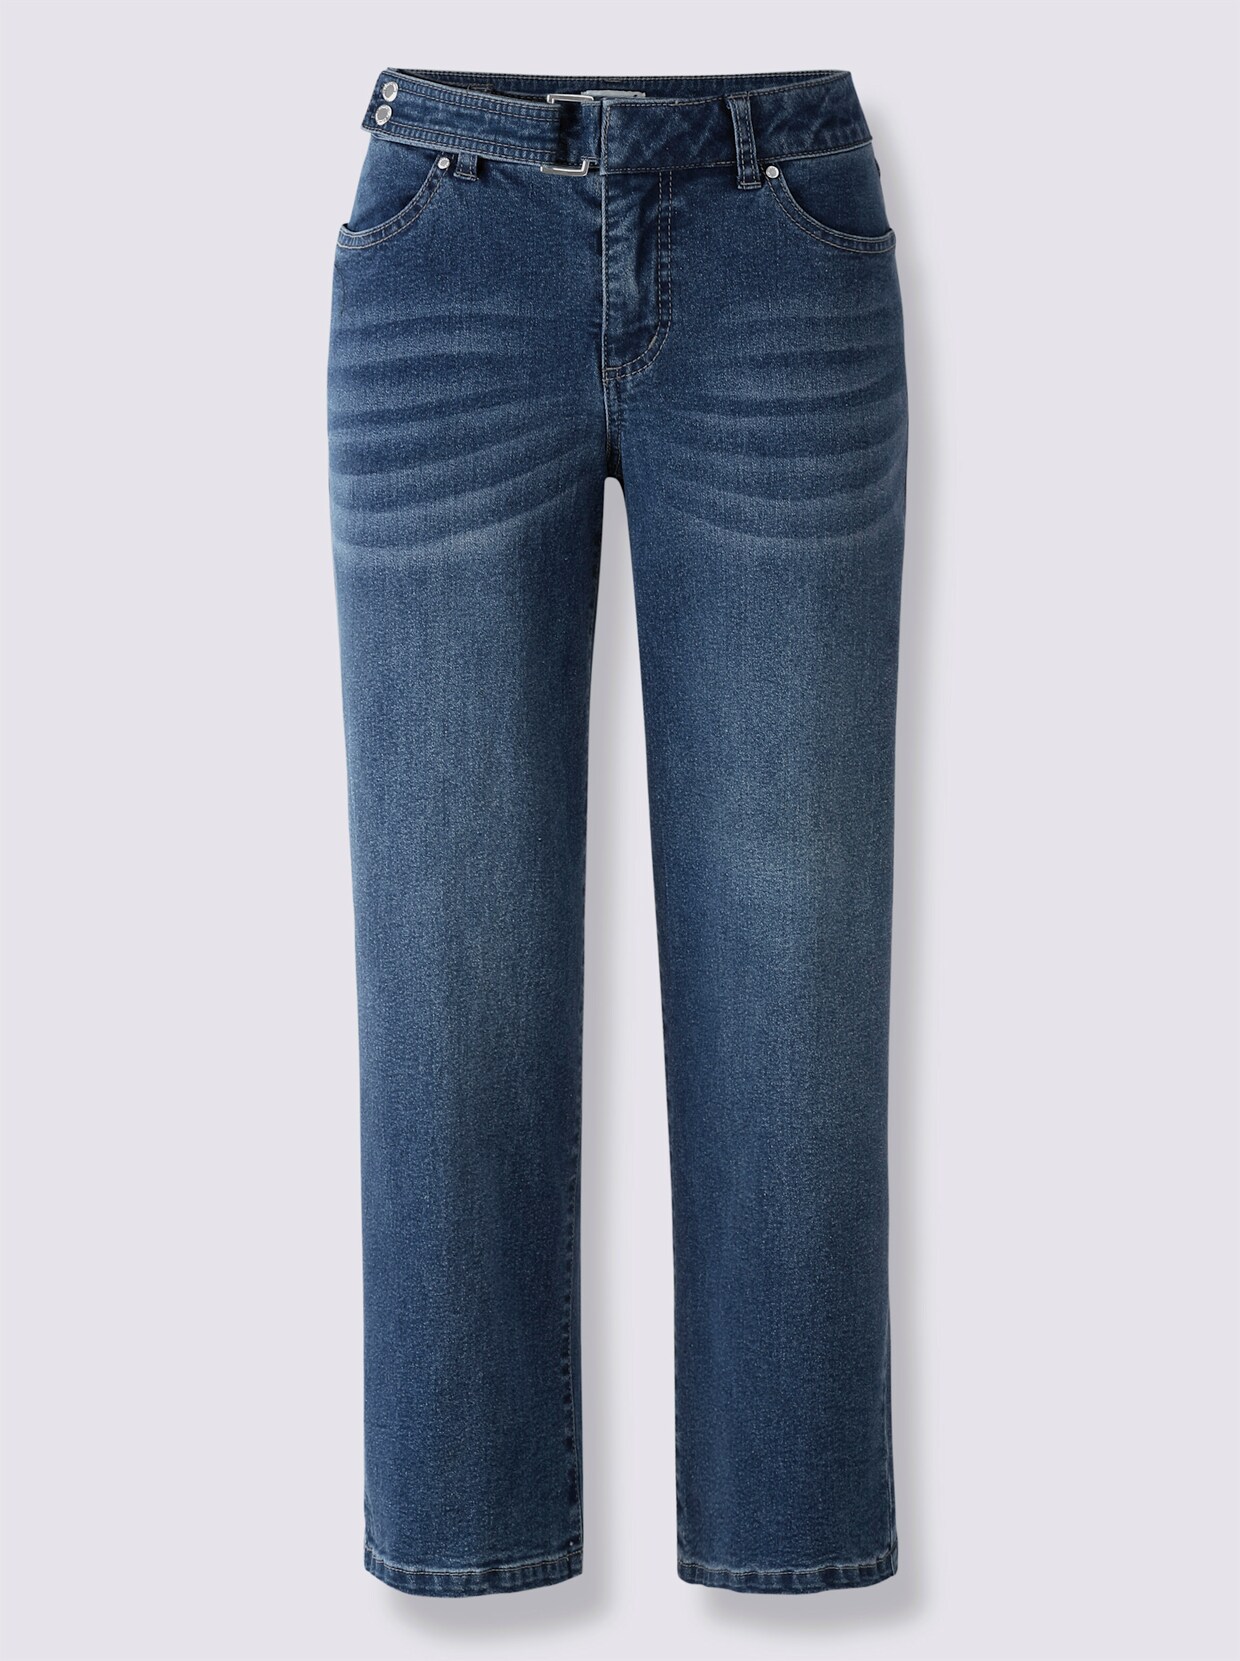 Jeans-Culotte - blue-stone-washed